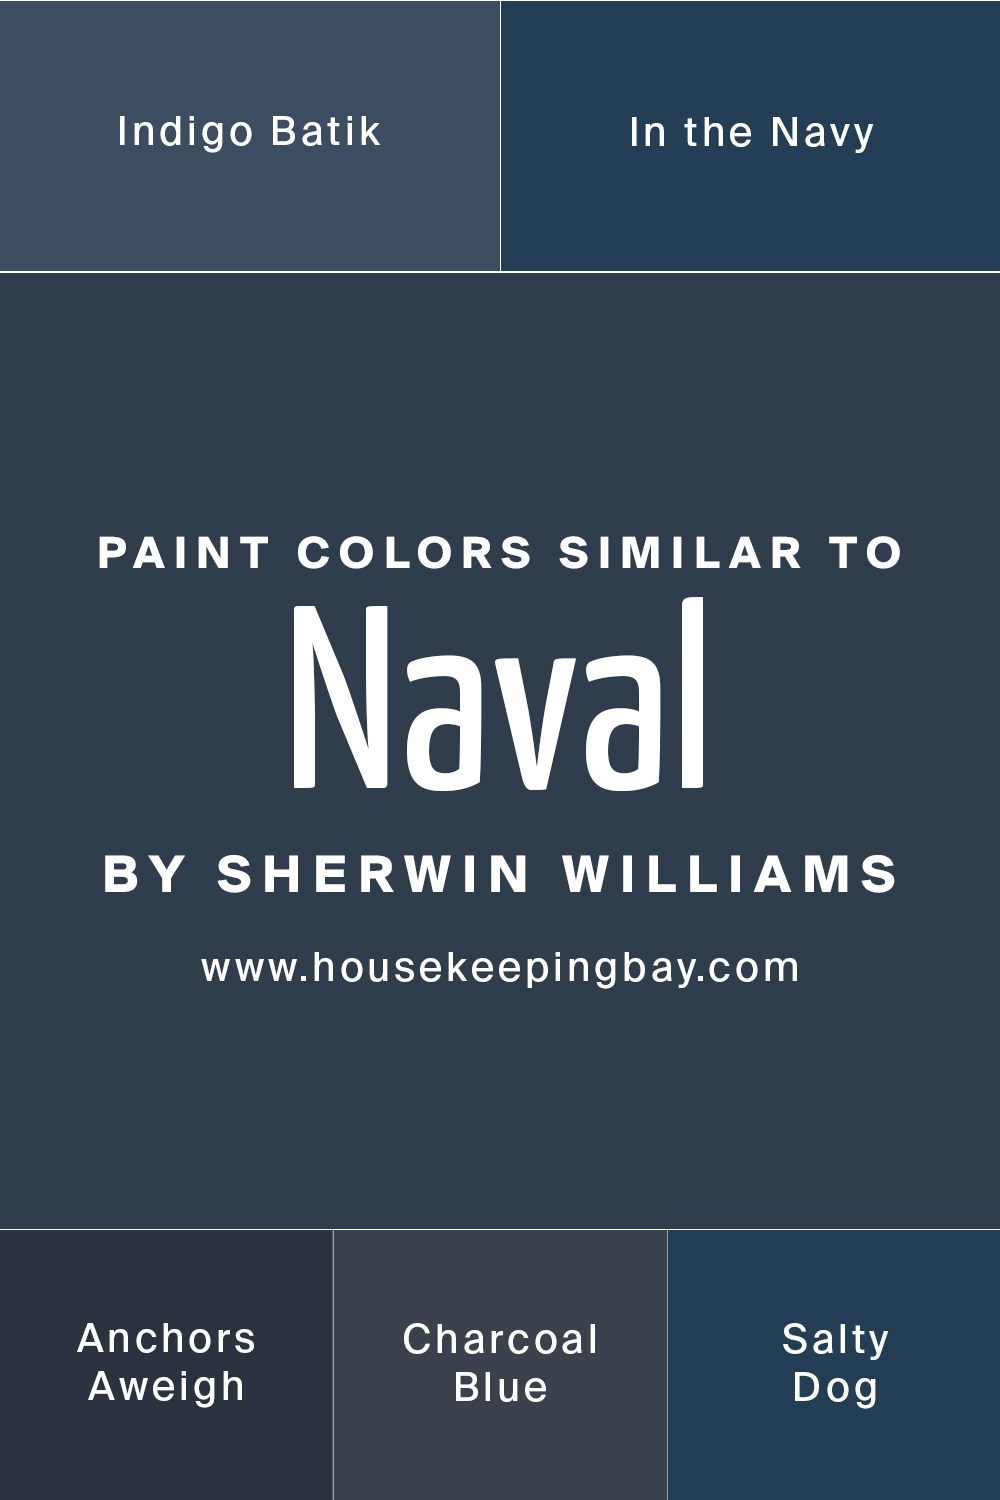 Paint Colors Similar to Naval by Sherwin Williams